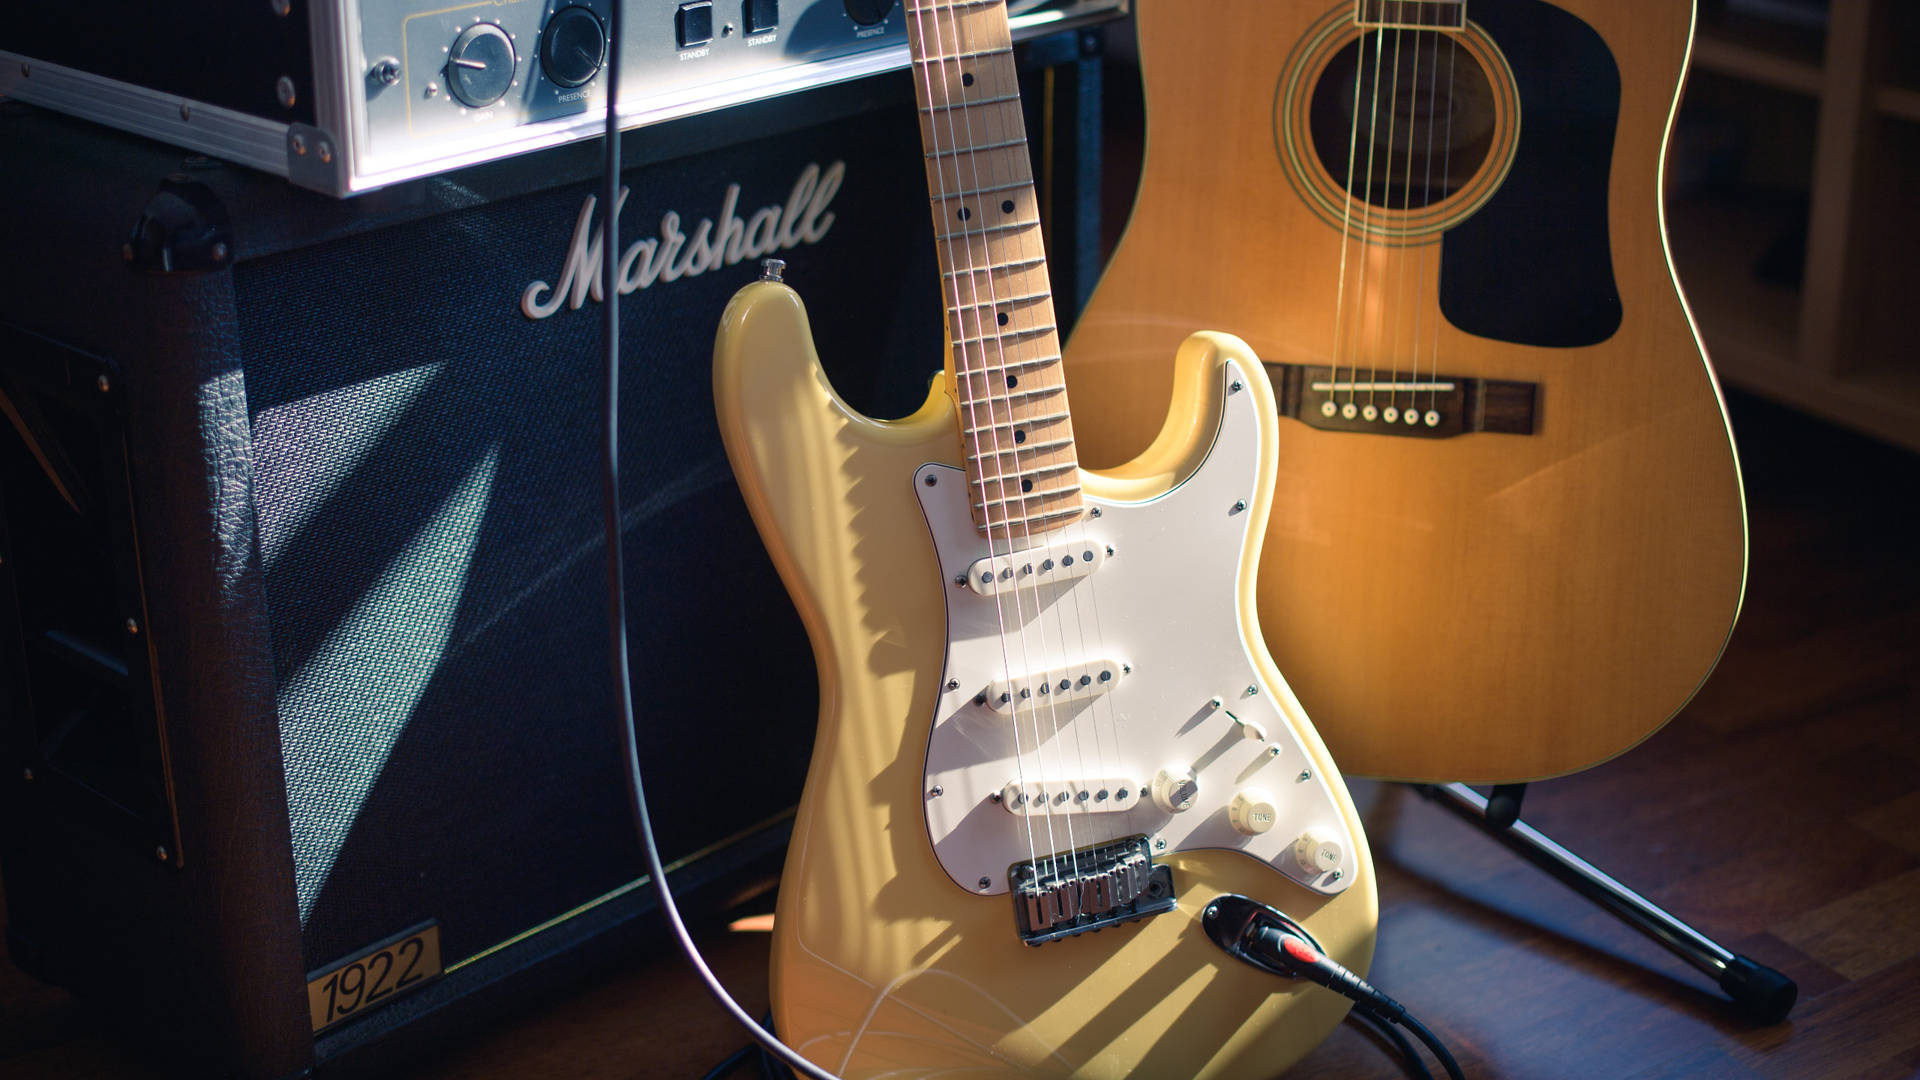 Guitars With Marshall Guitar Amplifier Background